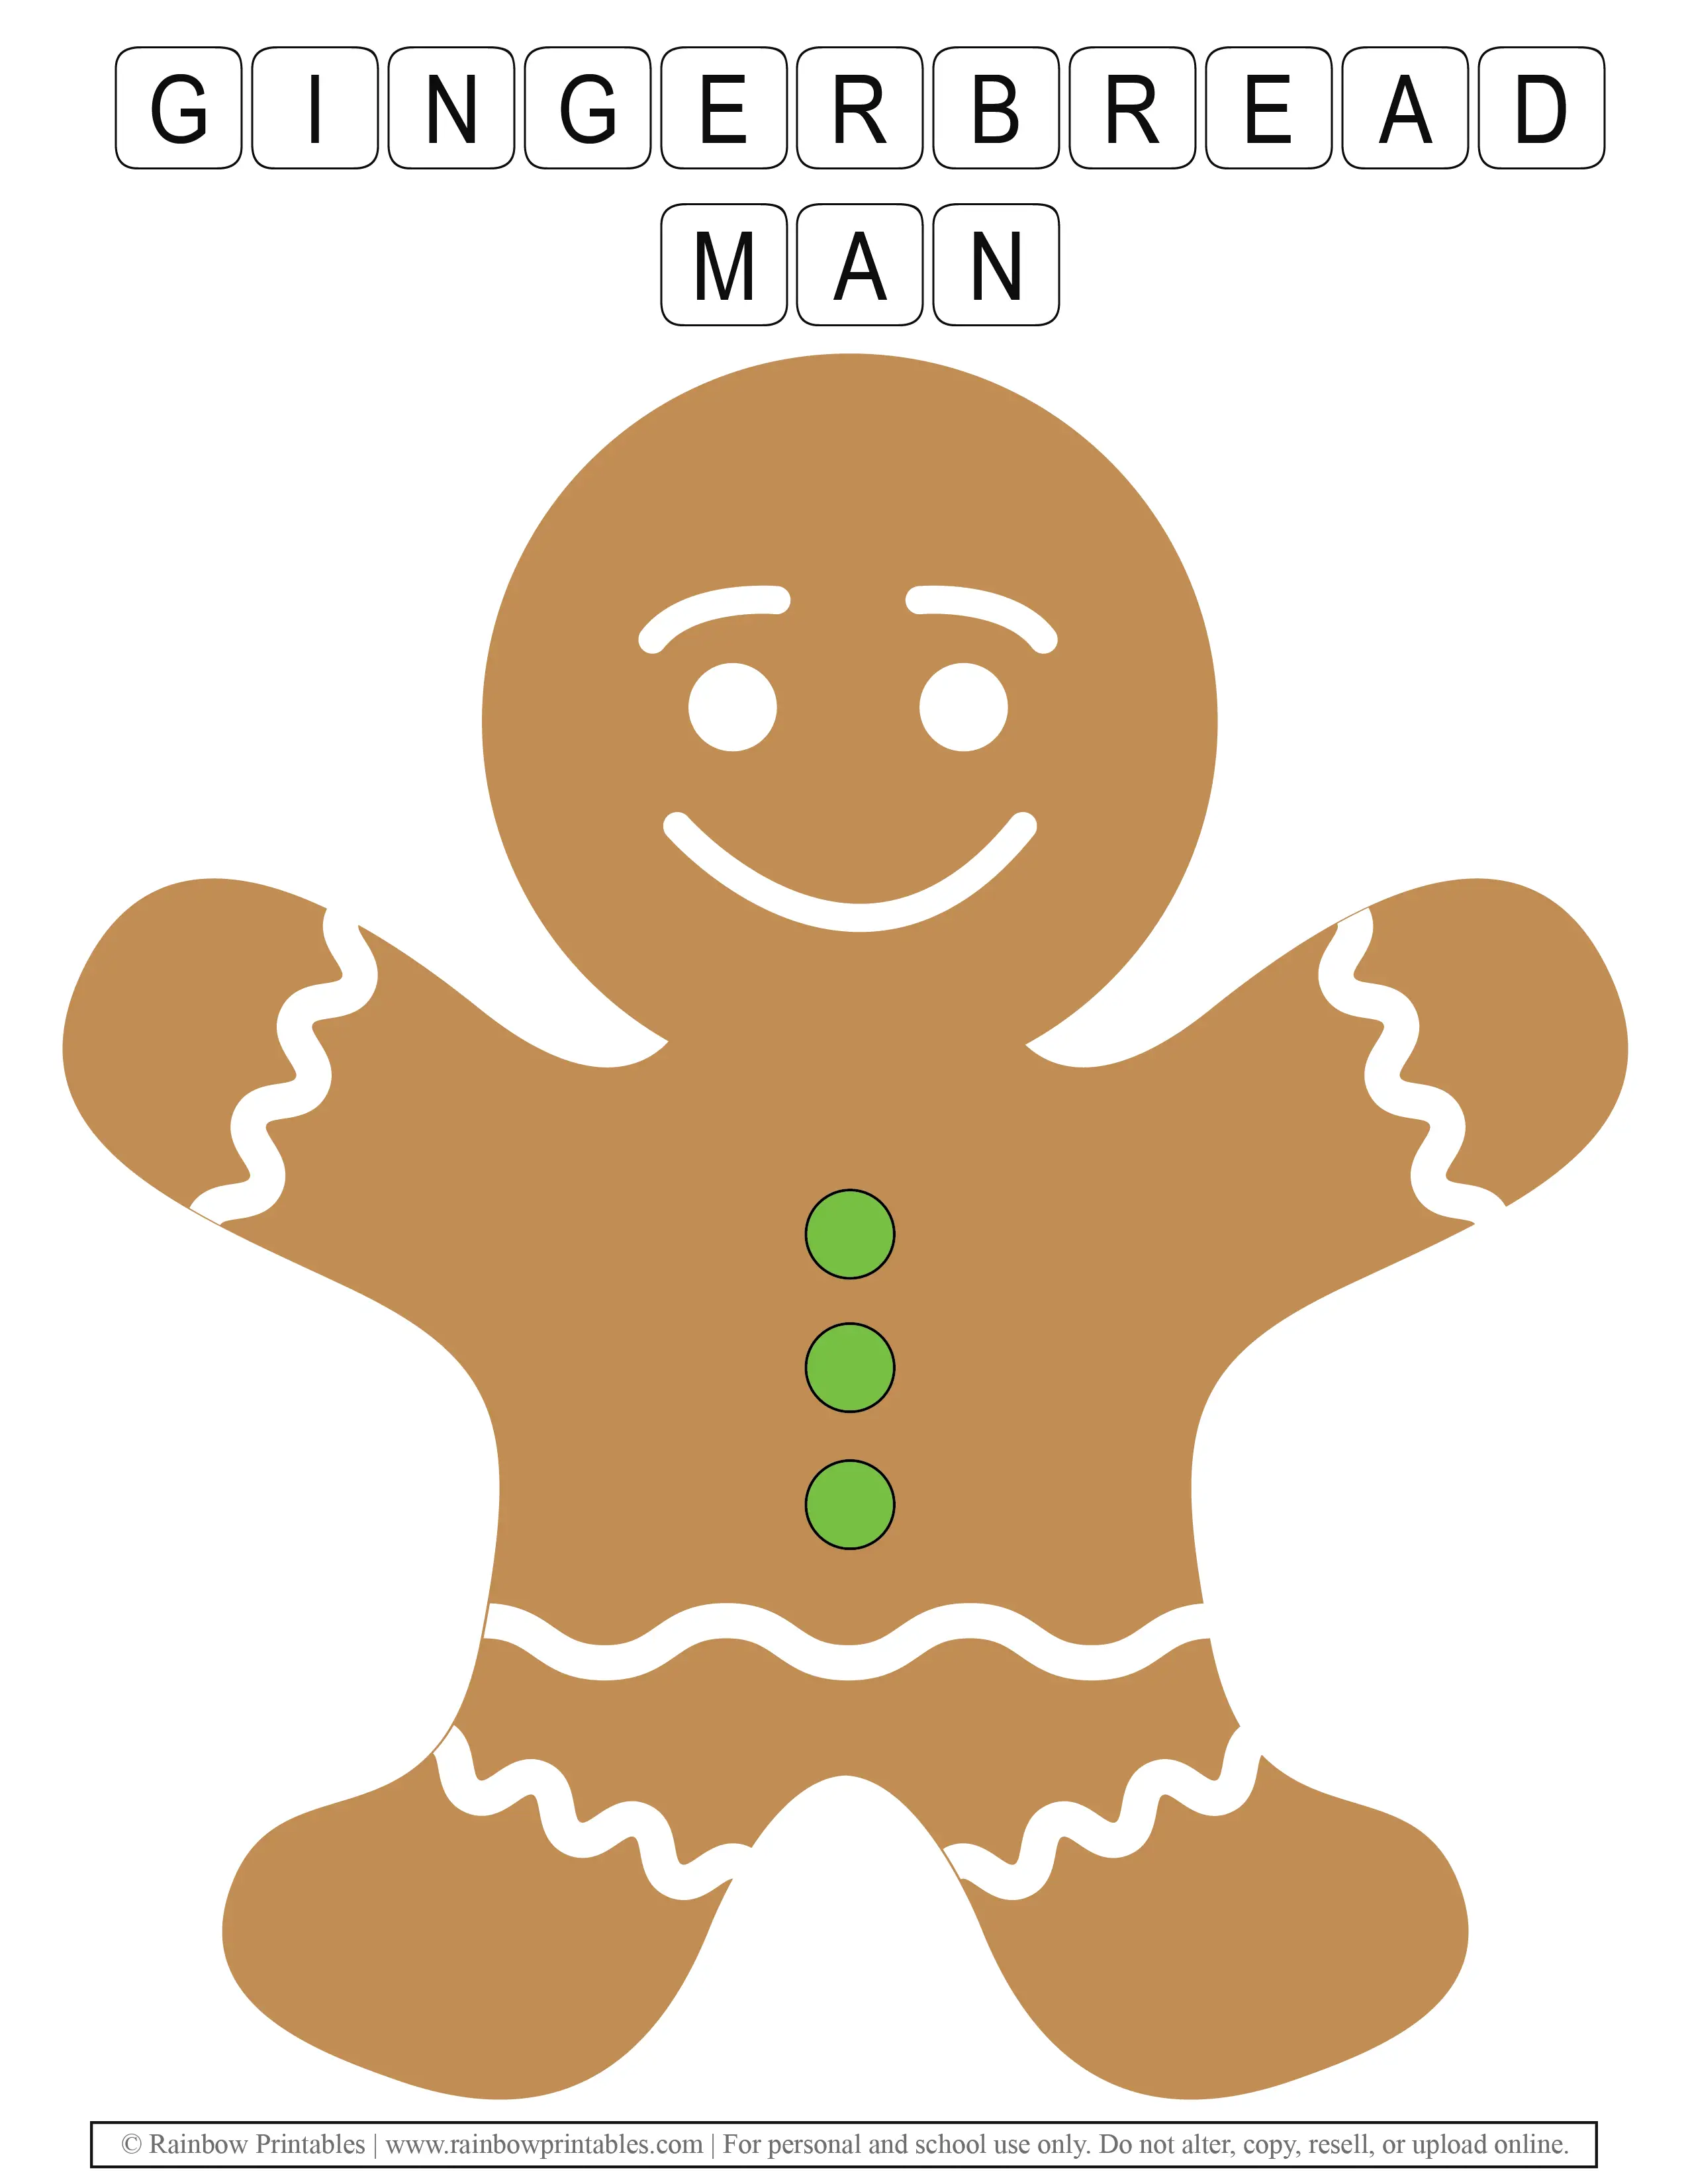 Gingerbread Man Outline Arts Craft for Kids Christmas Holiday Blank Ginger Bread Guy Coloring Page Kids Colorful Xmas